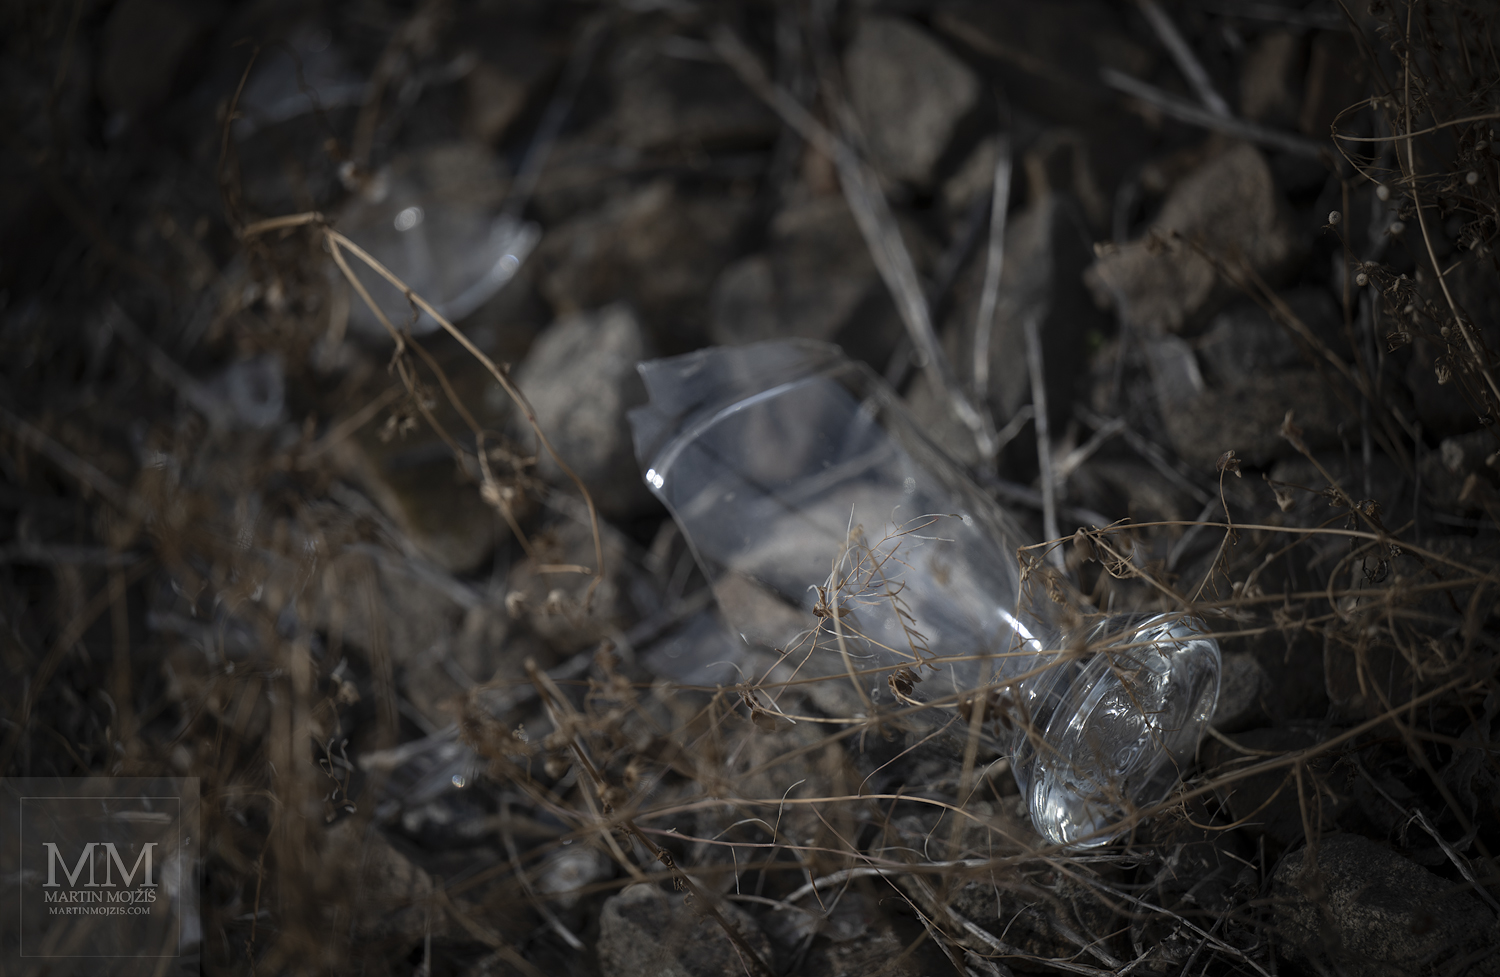 A broken glass in the grass. Fine art photograph IN THE GRASSES III, photographed by Martin Mojzis.